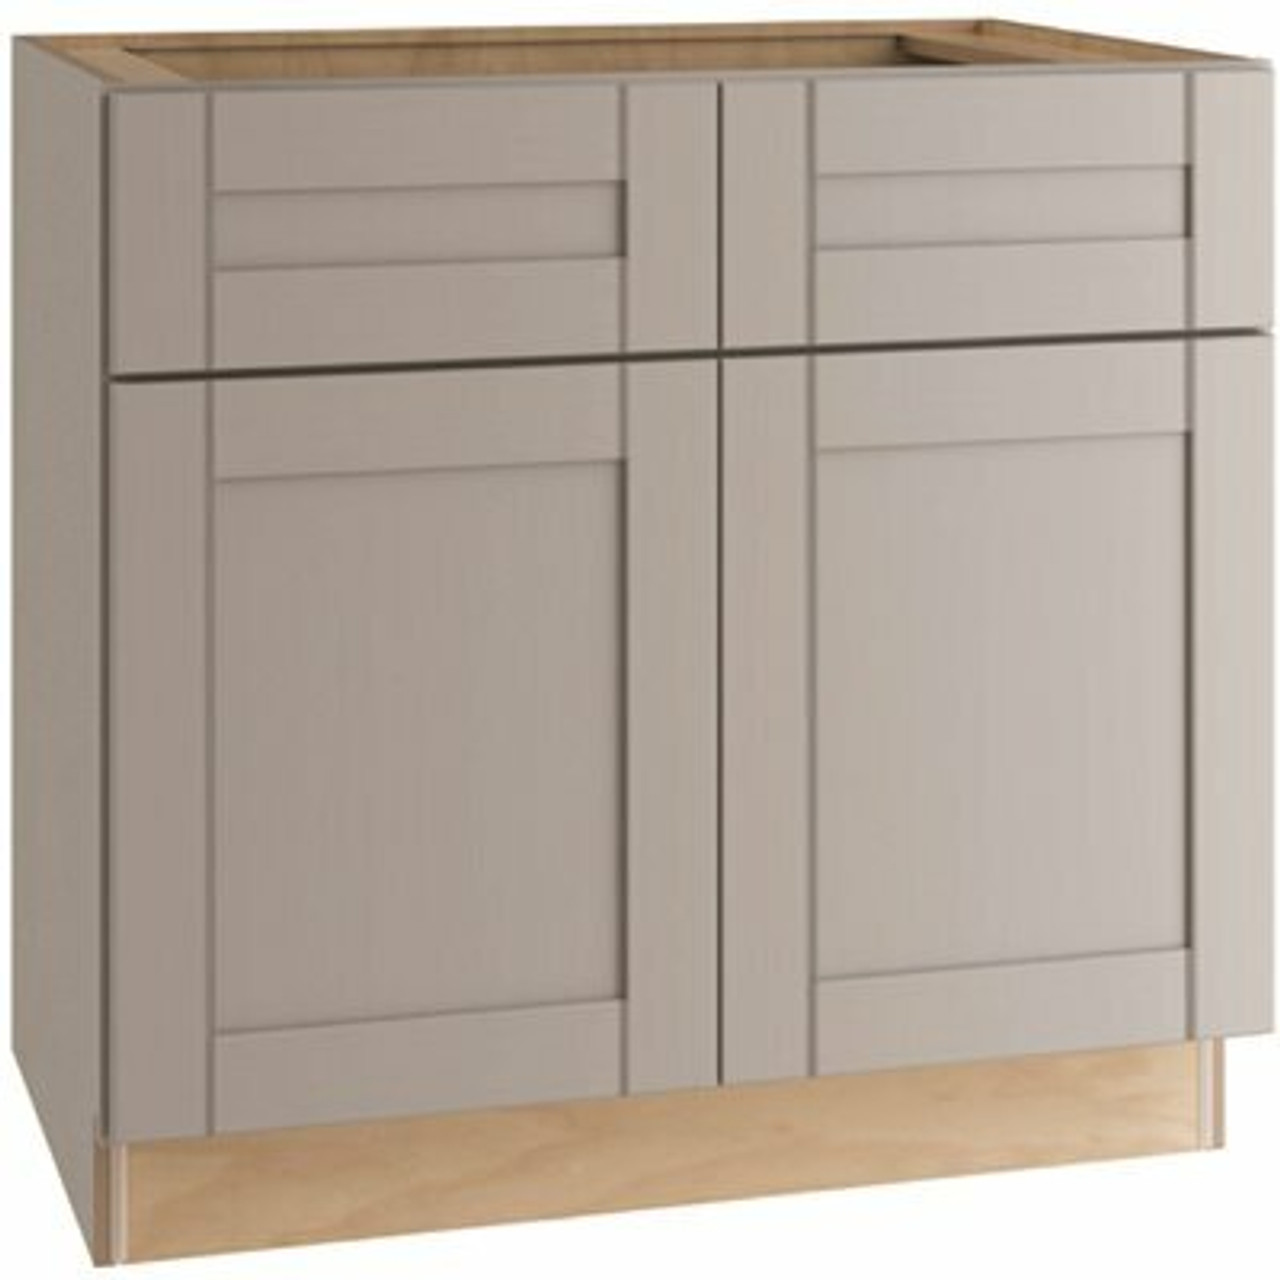 Arlington Veiled Gray Shaker Assembled Plywood 36 In. X 34.5 In. X 21 In. Bath Vanity Sink Base Cabinet With Soft Close